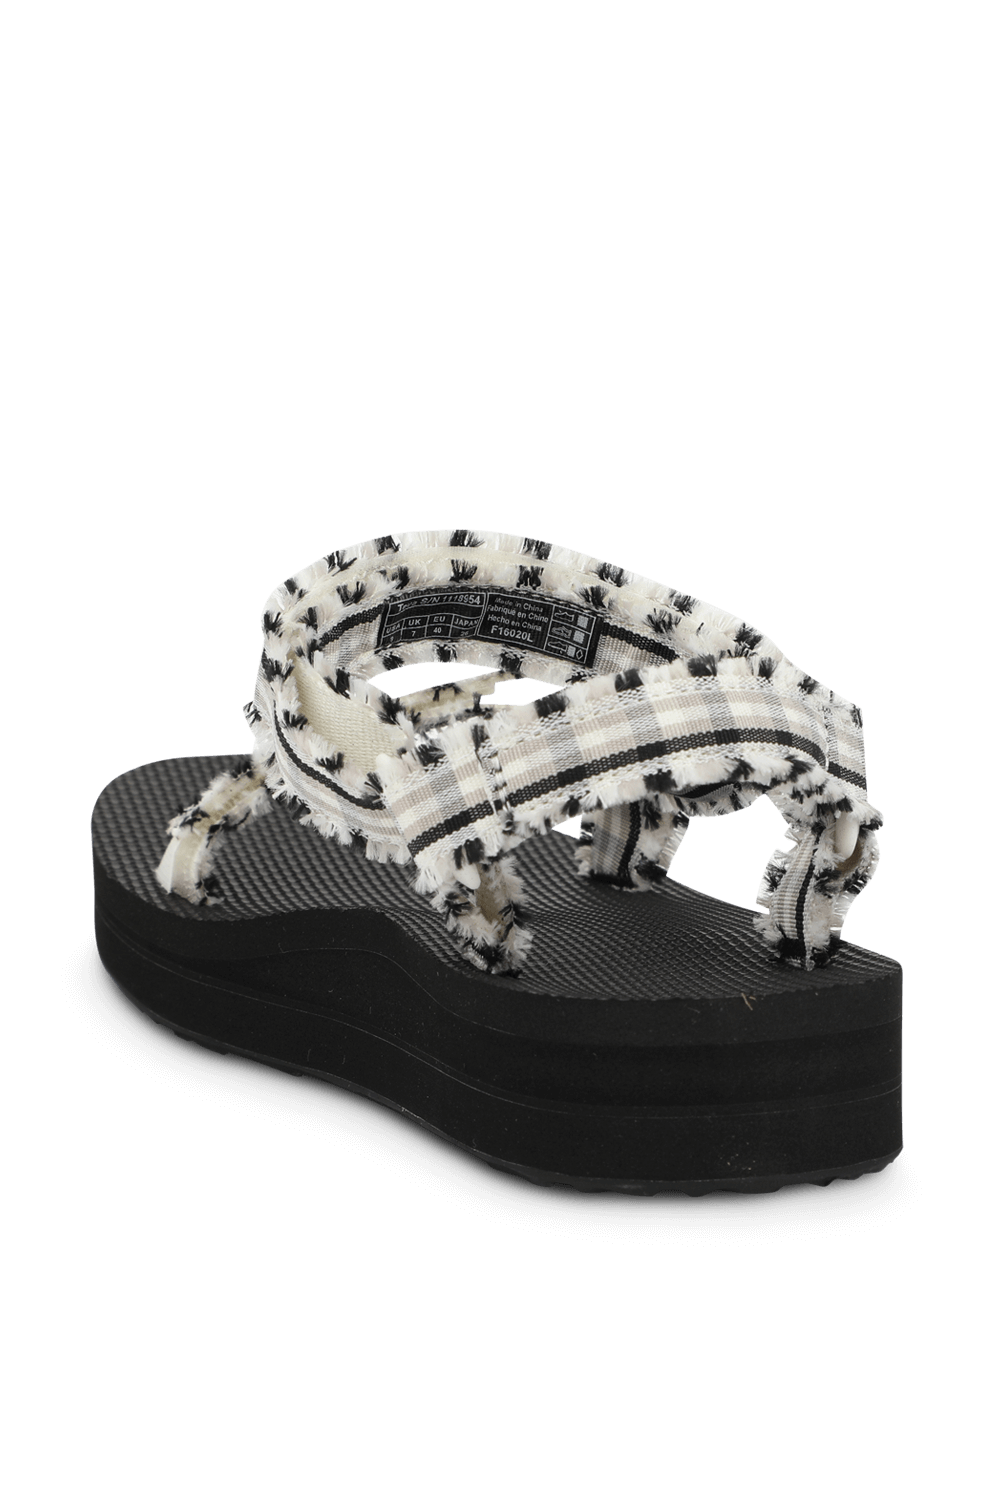 Midform Fray Frazier Sandals in White and Black TEVA